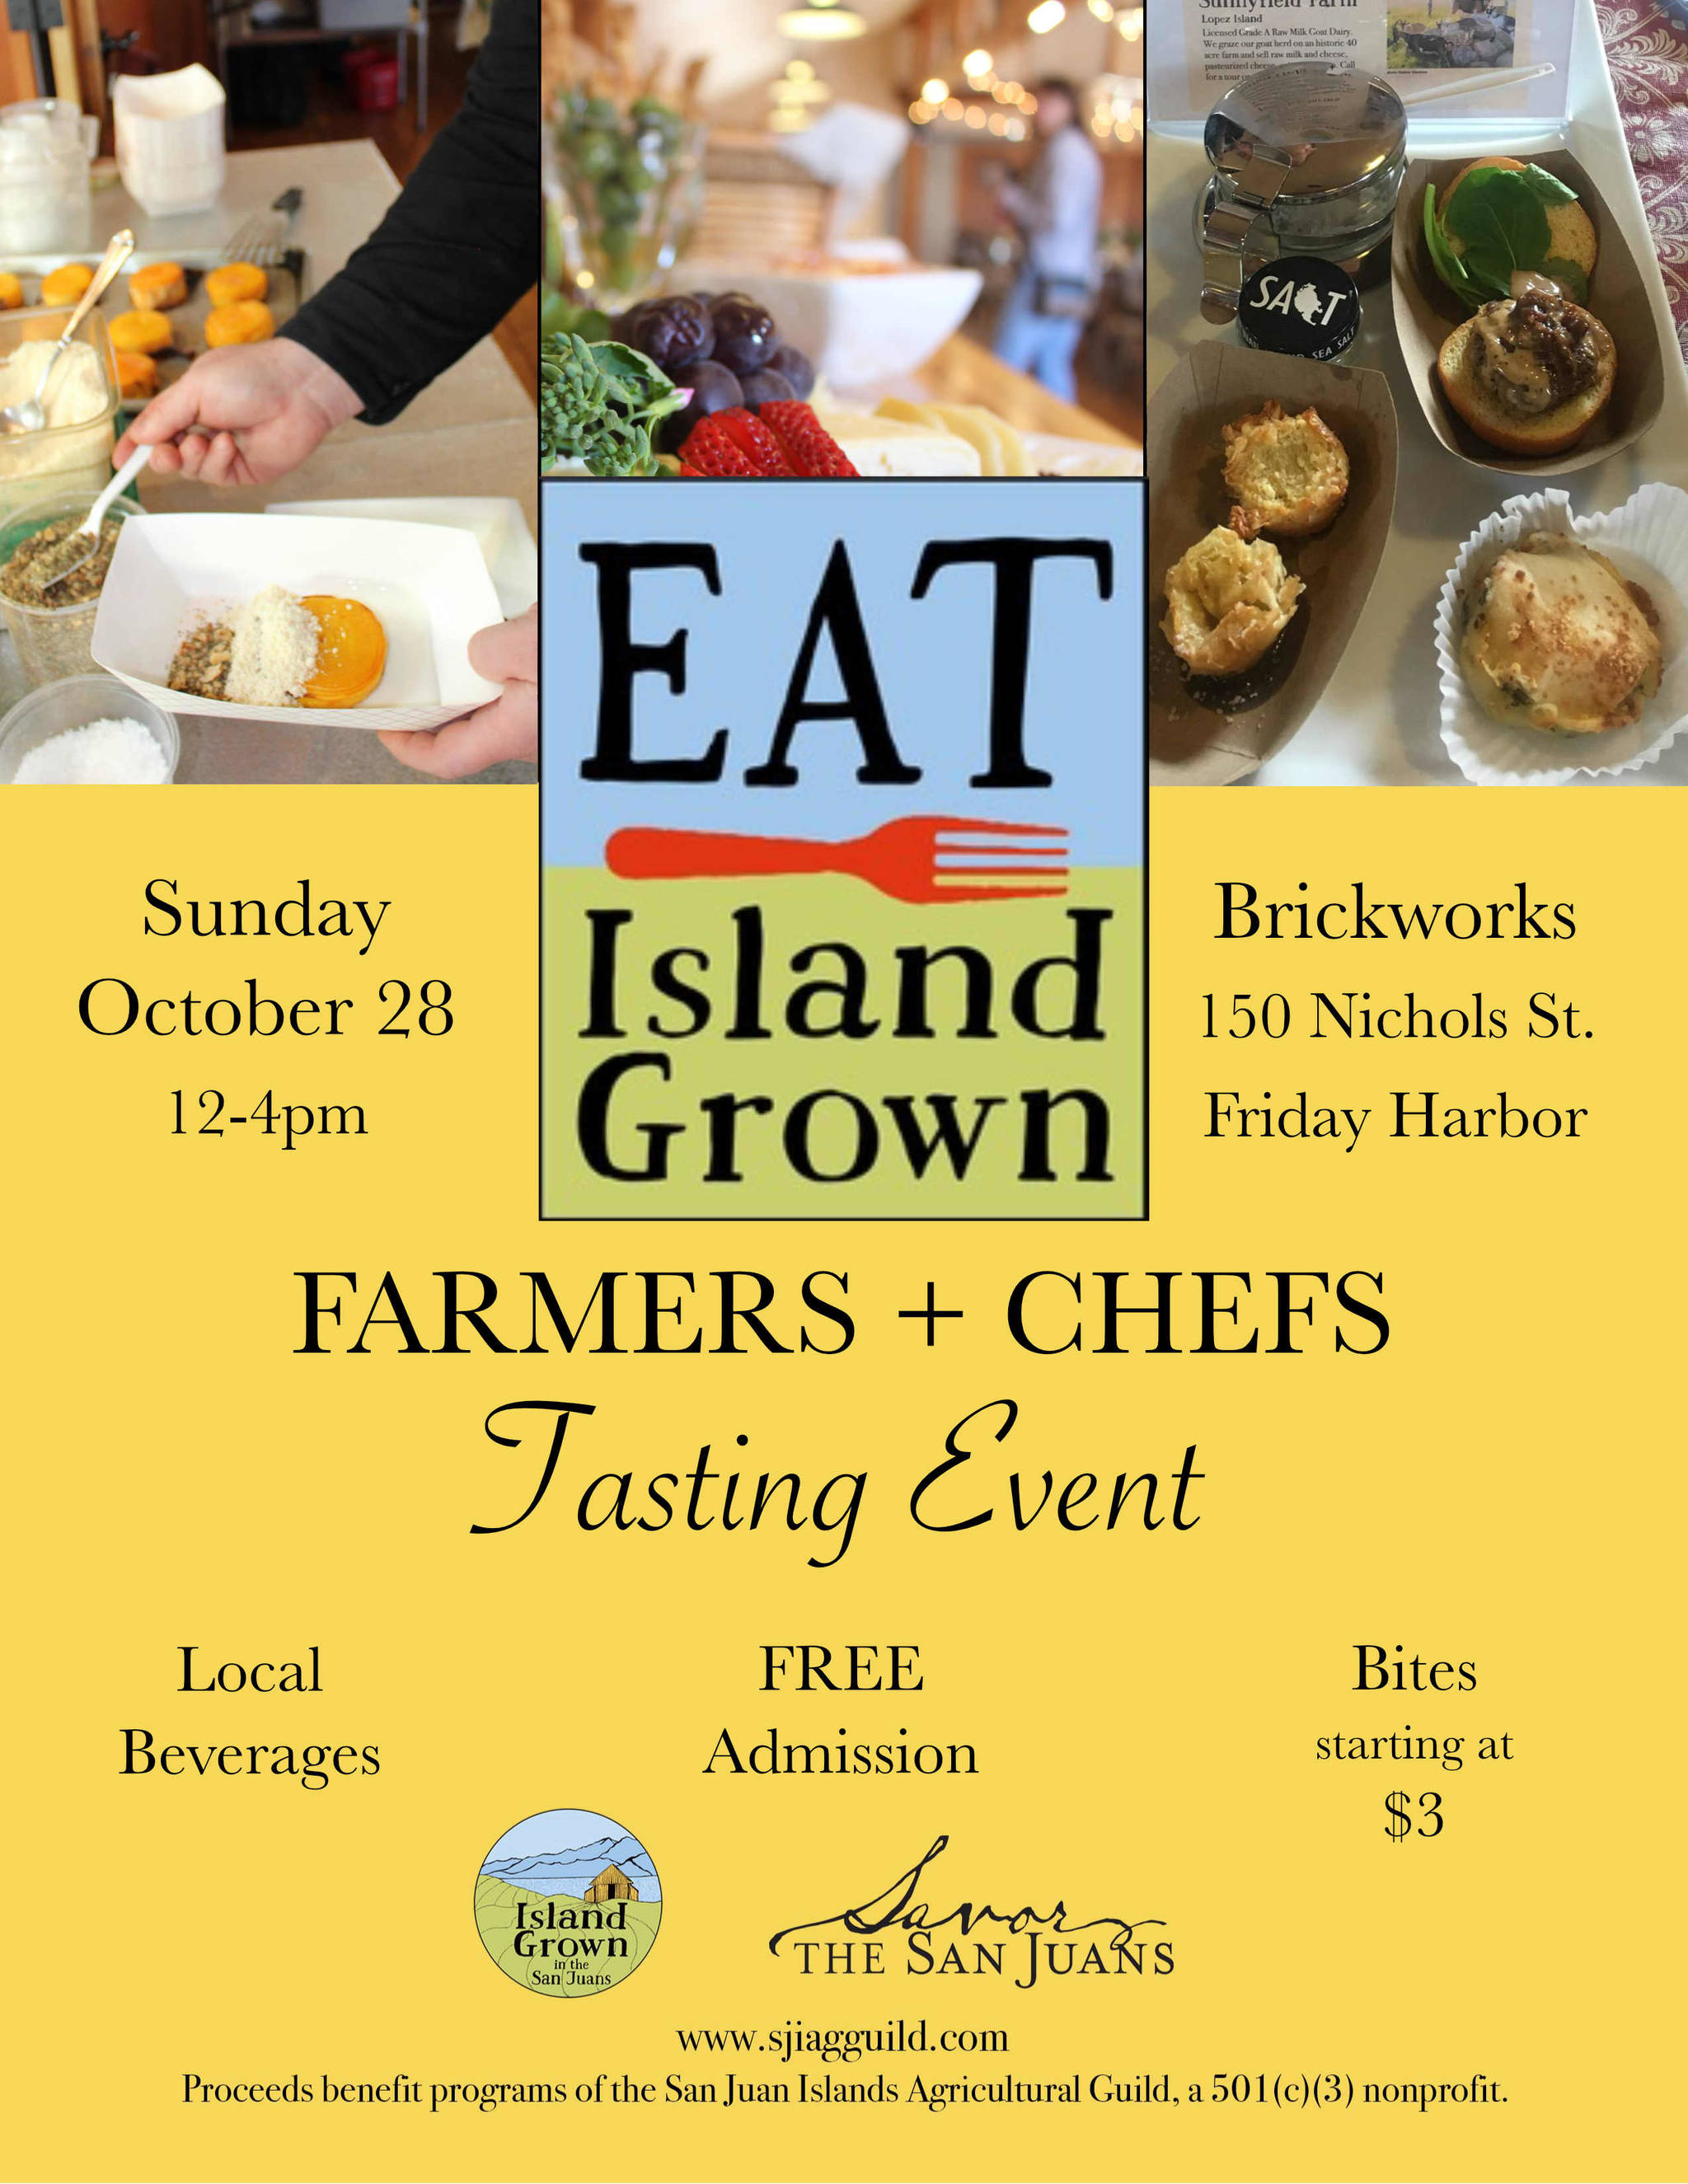 Celebrate local food at “Eat Island Grown”